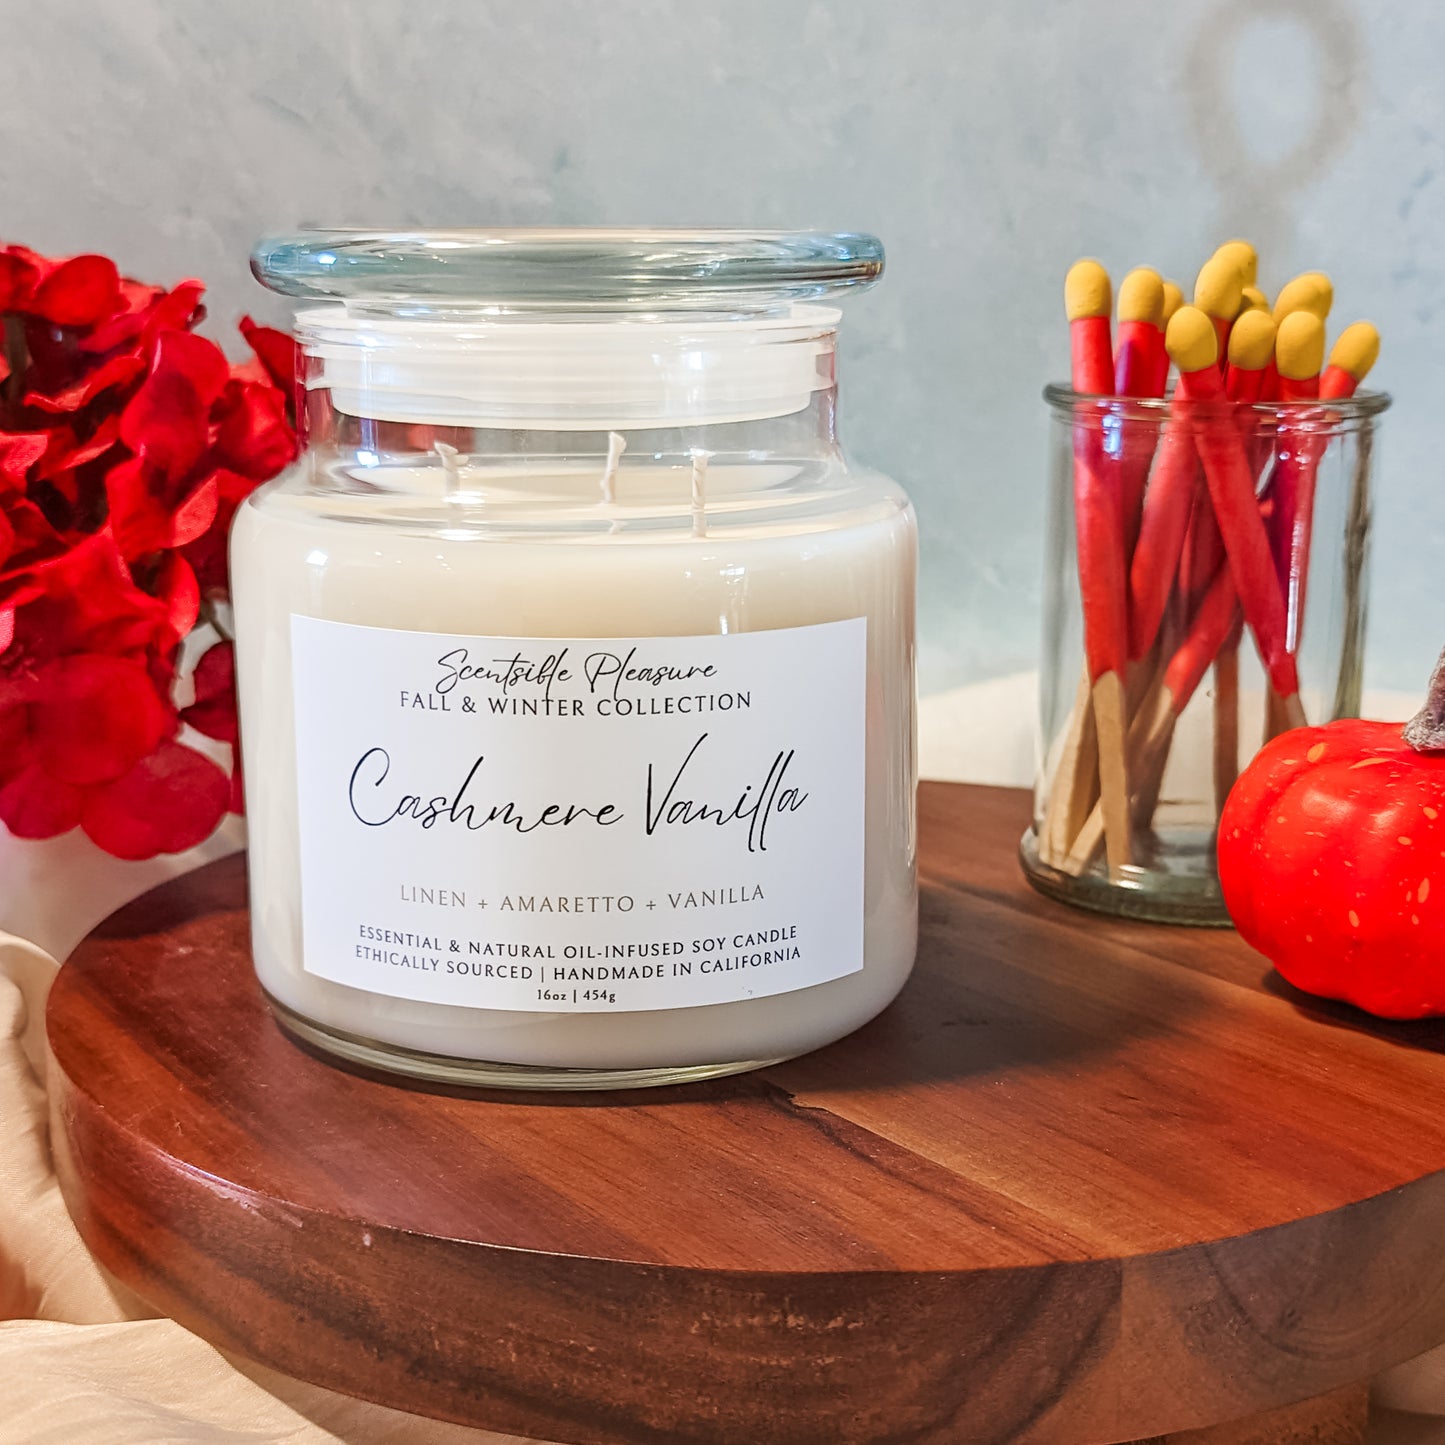 16oz 3-Wick Cashmere Vanilla Scented Candle, made with soy wax and scent notes of linen, amaretto, and vanilla